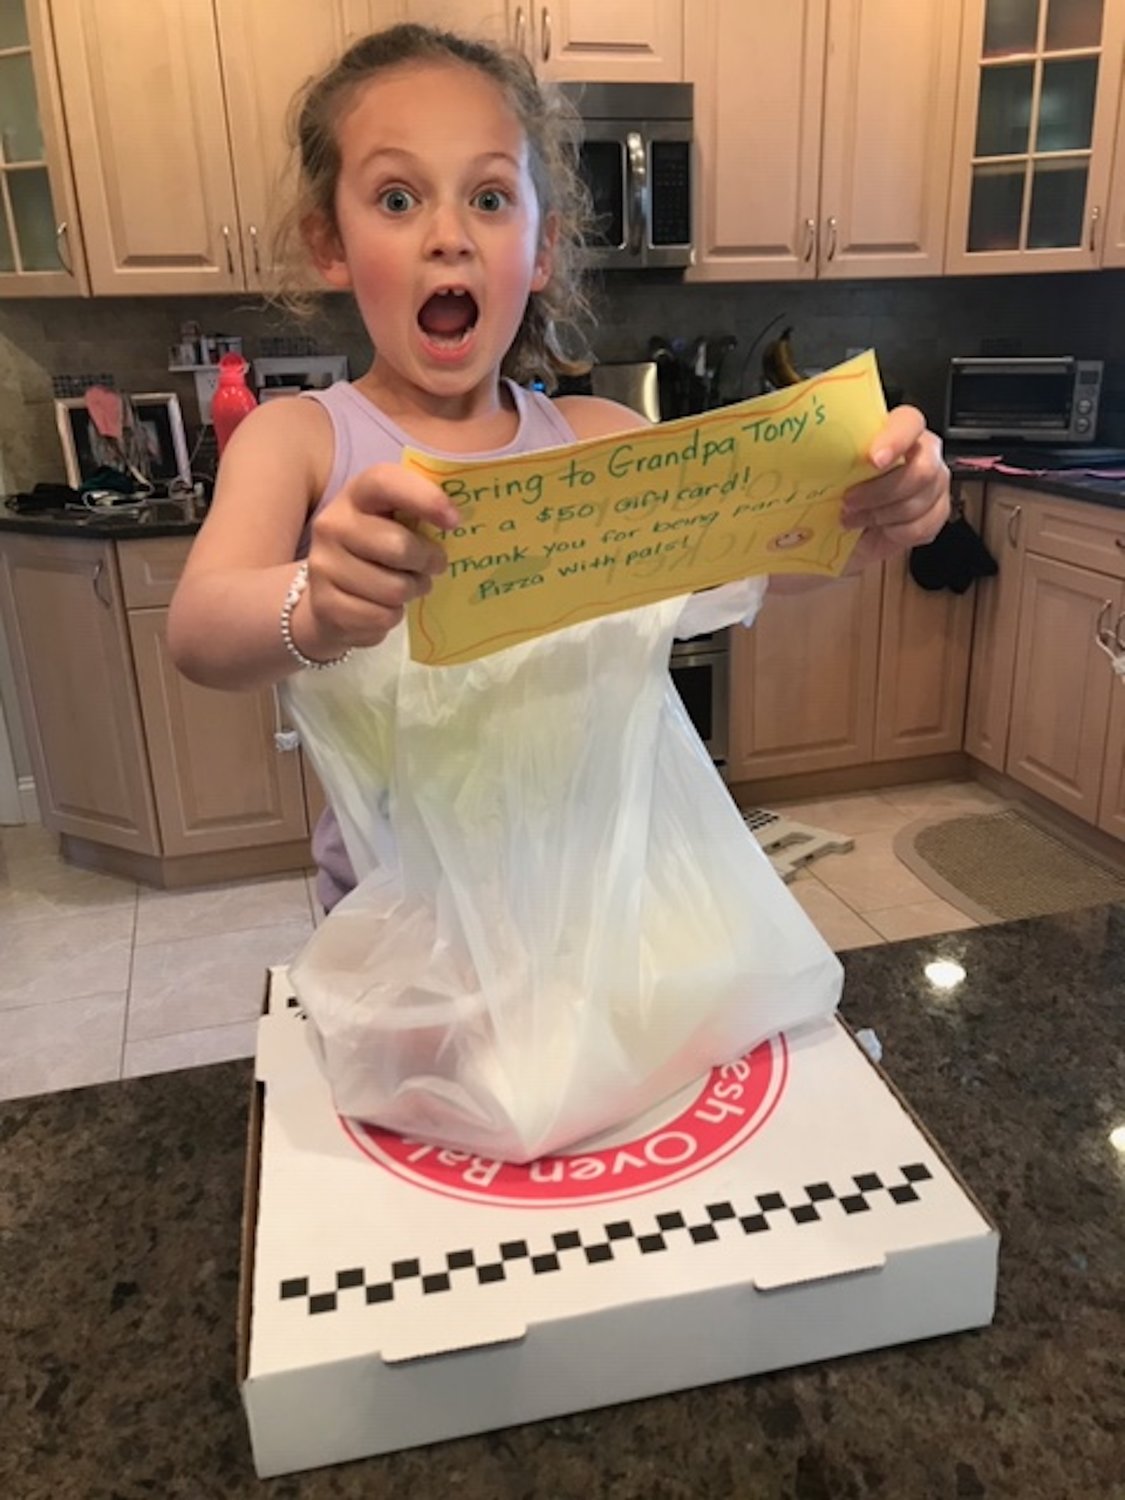 Mackenzie McCabe earned a “golden ticket” for a $50 gift card to Grandpa Tony’s, which hosted a virtual pizza party on May 15.